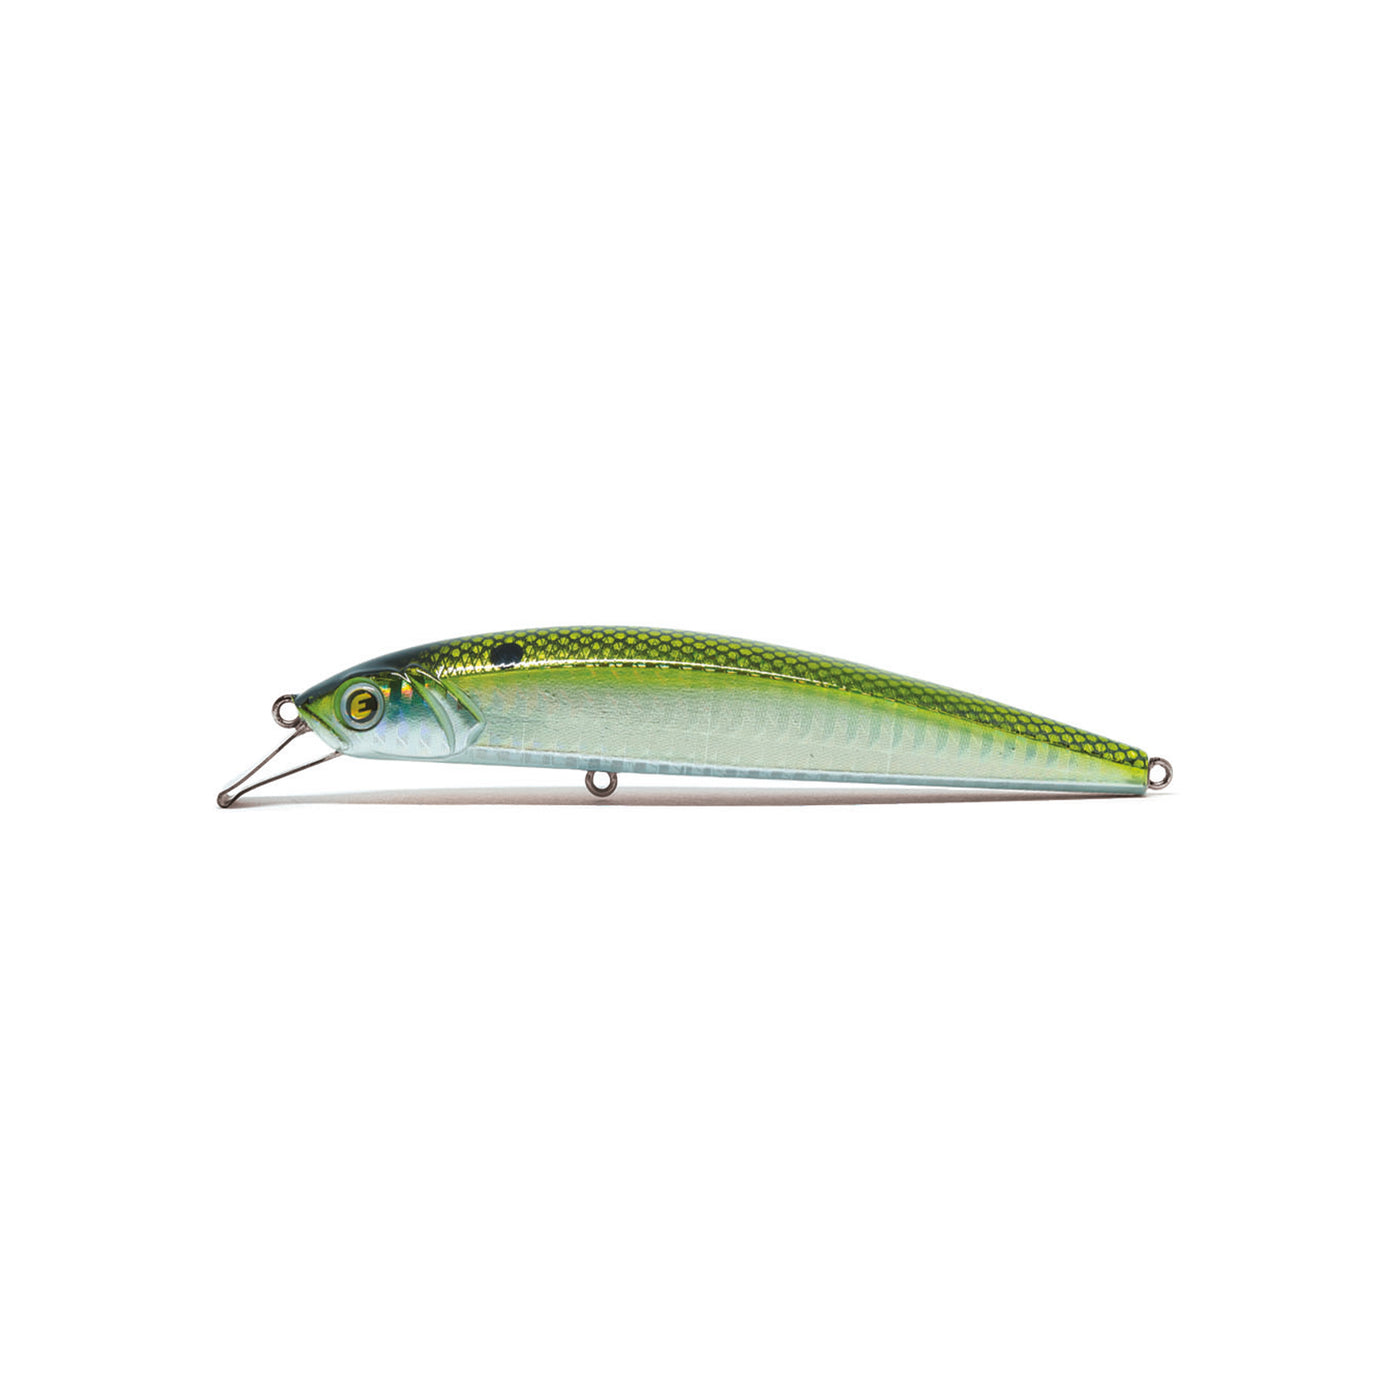 Loader Minnow – A Band of Anglers Inc.